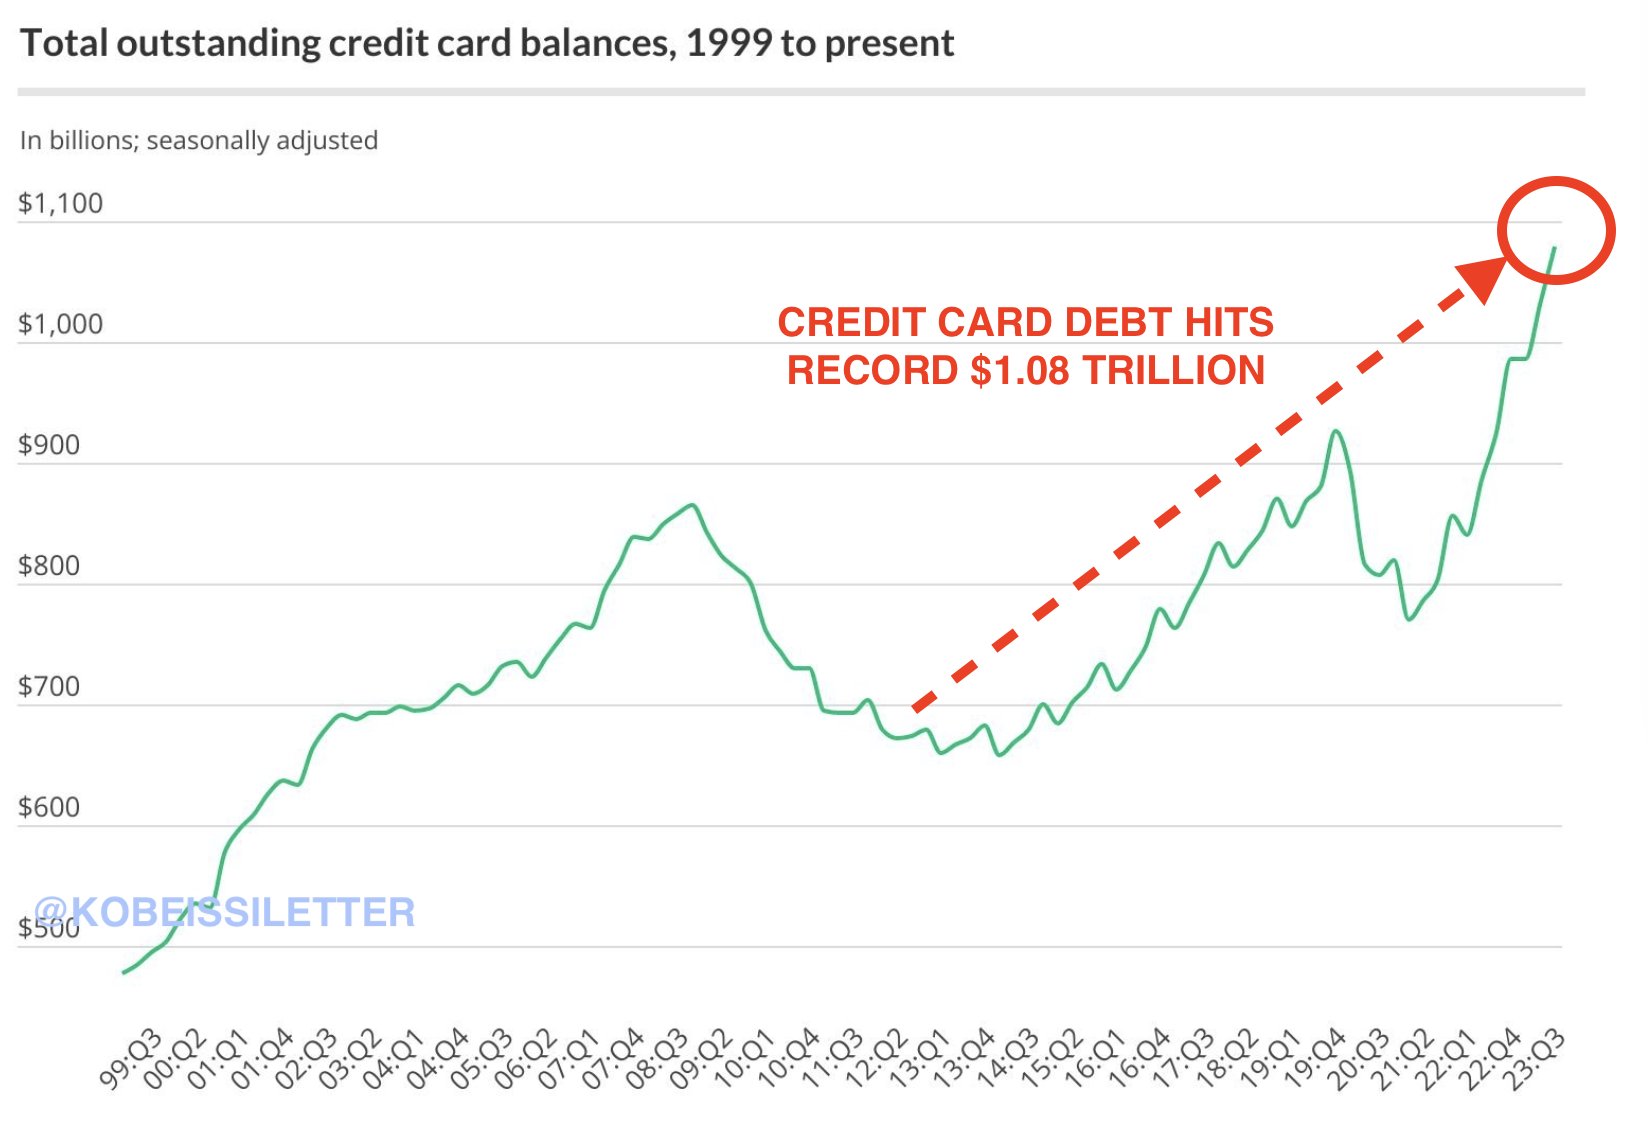 Total Outstanding Credit Card Balance: (Source: The Kobeissi Letter)